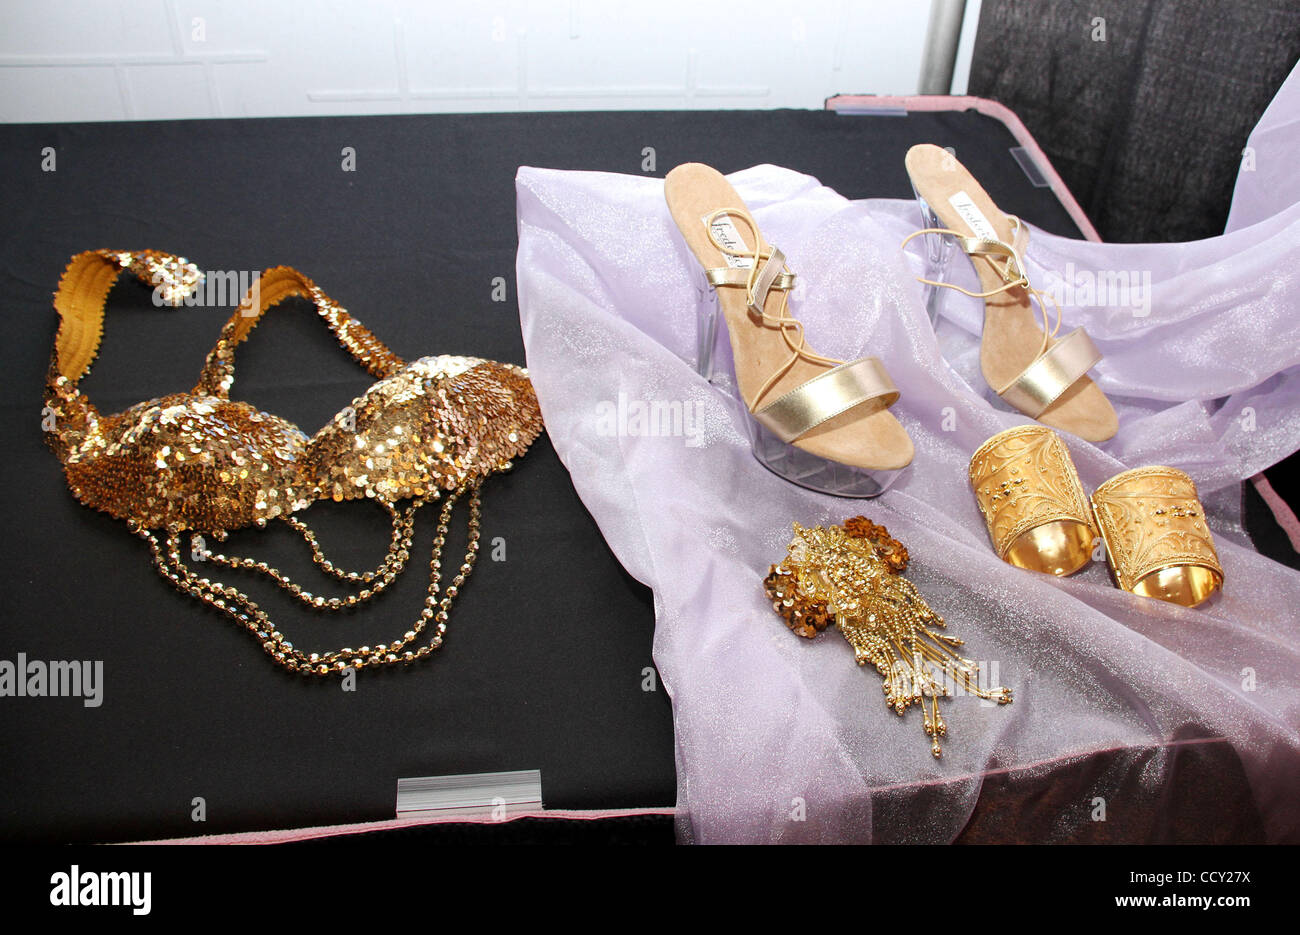 https://c8.alamy.com/comp/CCY27X/a-view-of-a-gold-sequenced-beaded-bra-fredericks-of-hollywood-heels-CCY27X.jpg